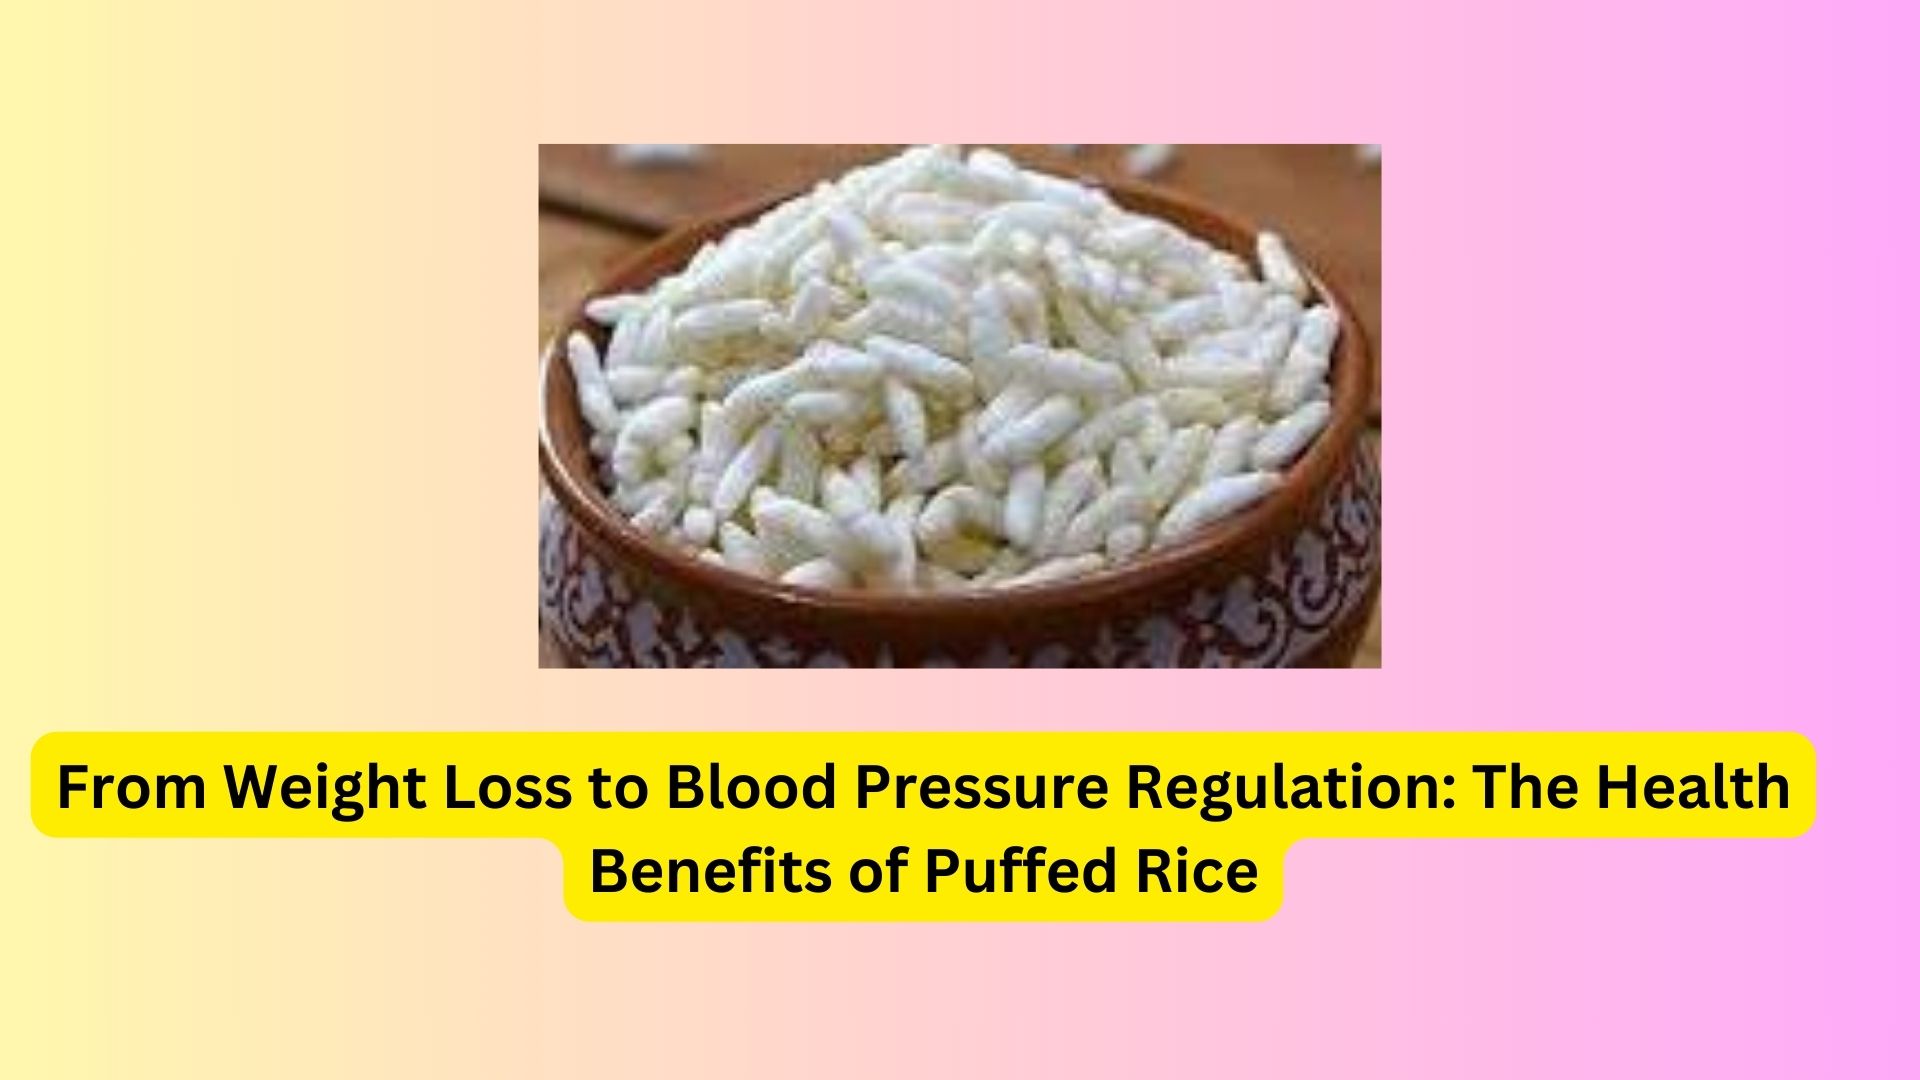 From Weight Loss to Blood Pressure Regulation: The Health Benefits of Puffed Rice